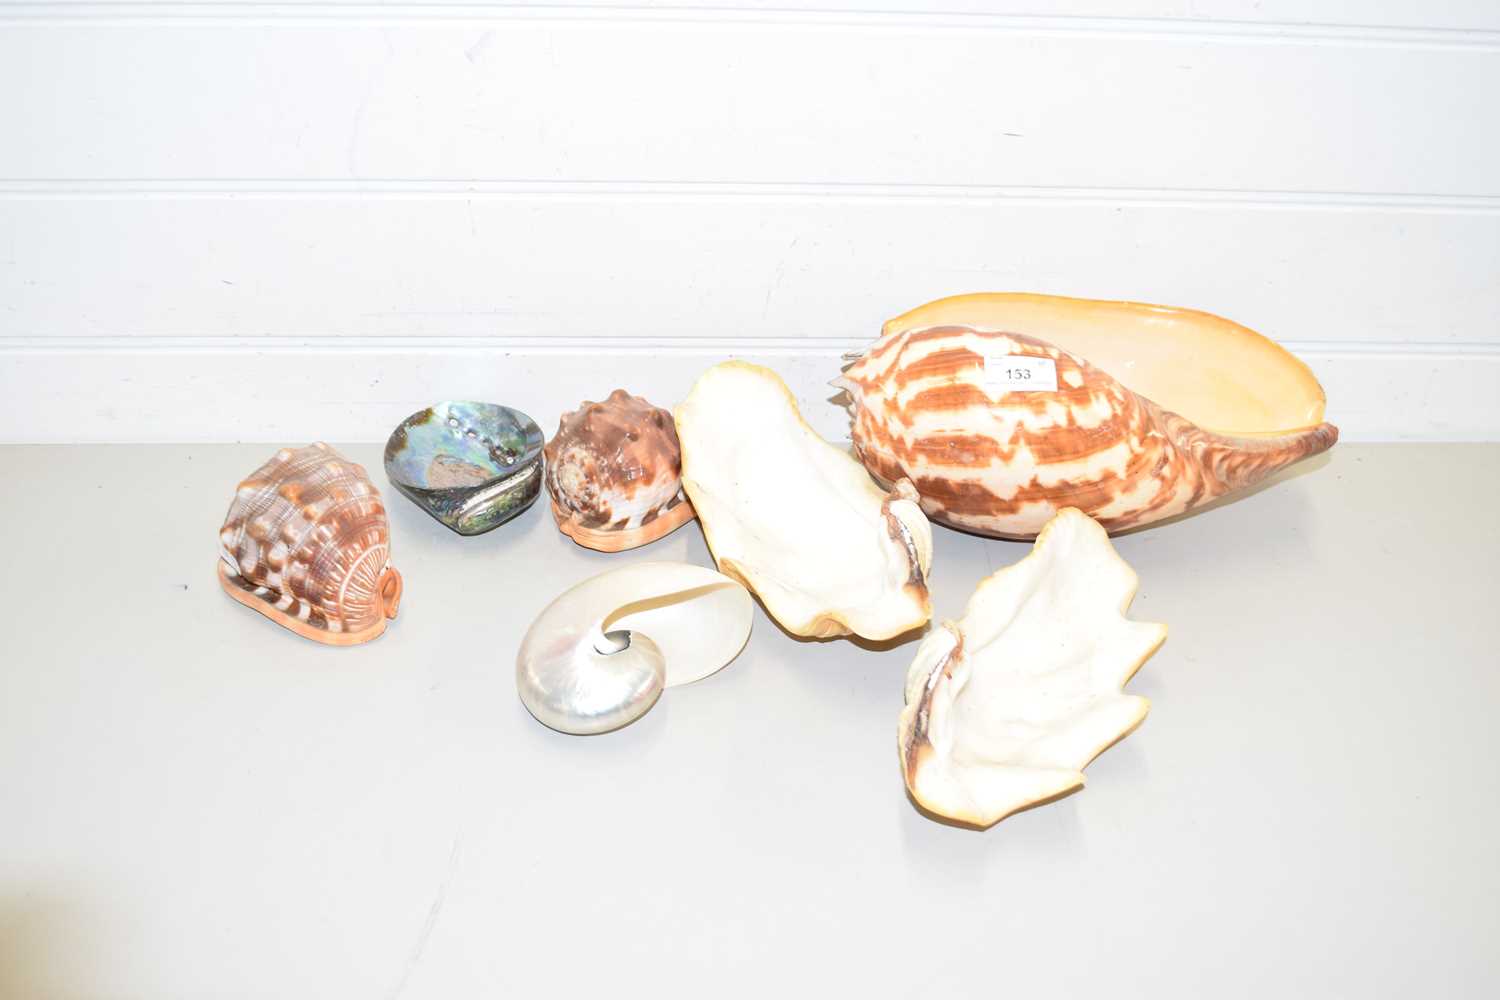 Lot 153 - COLLECTION OF VARIOUS SEASHELLS